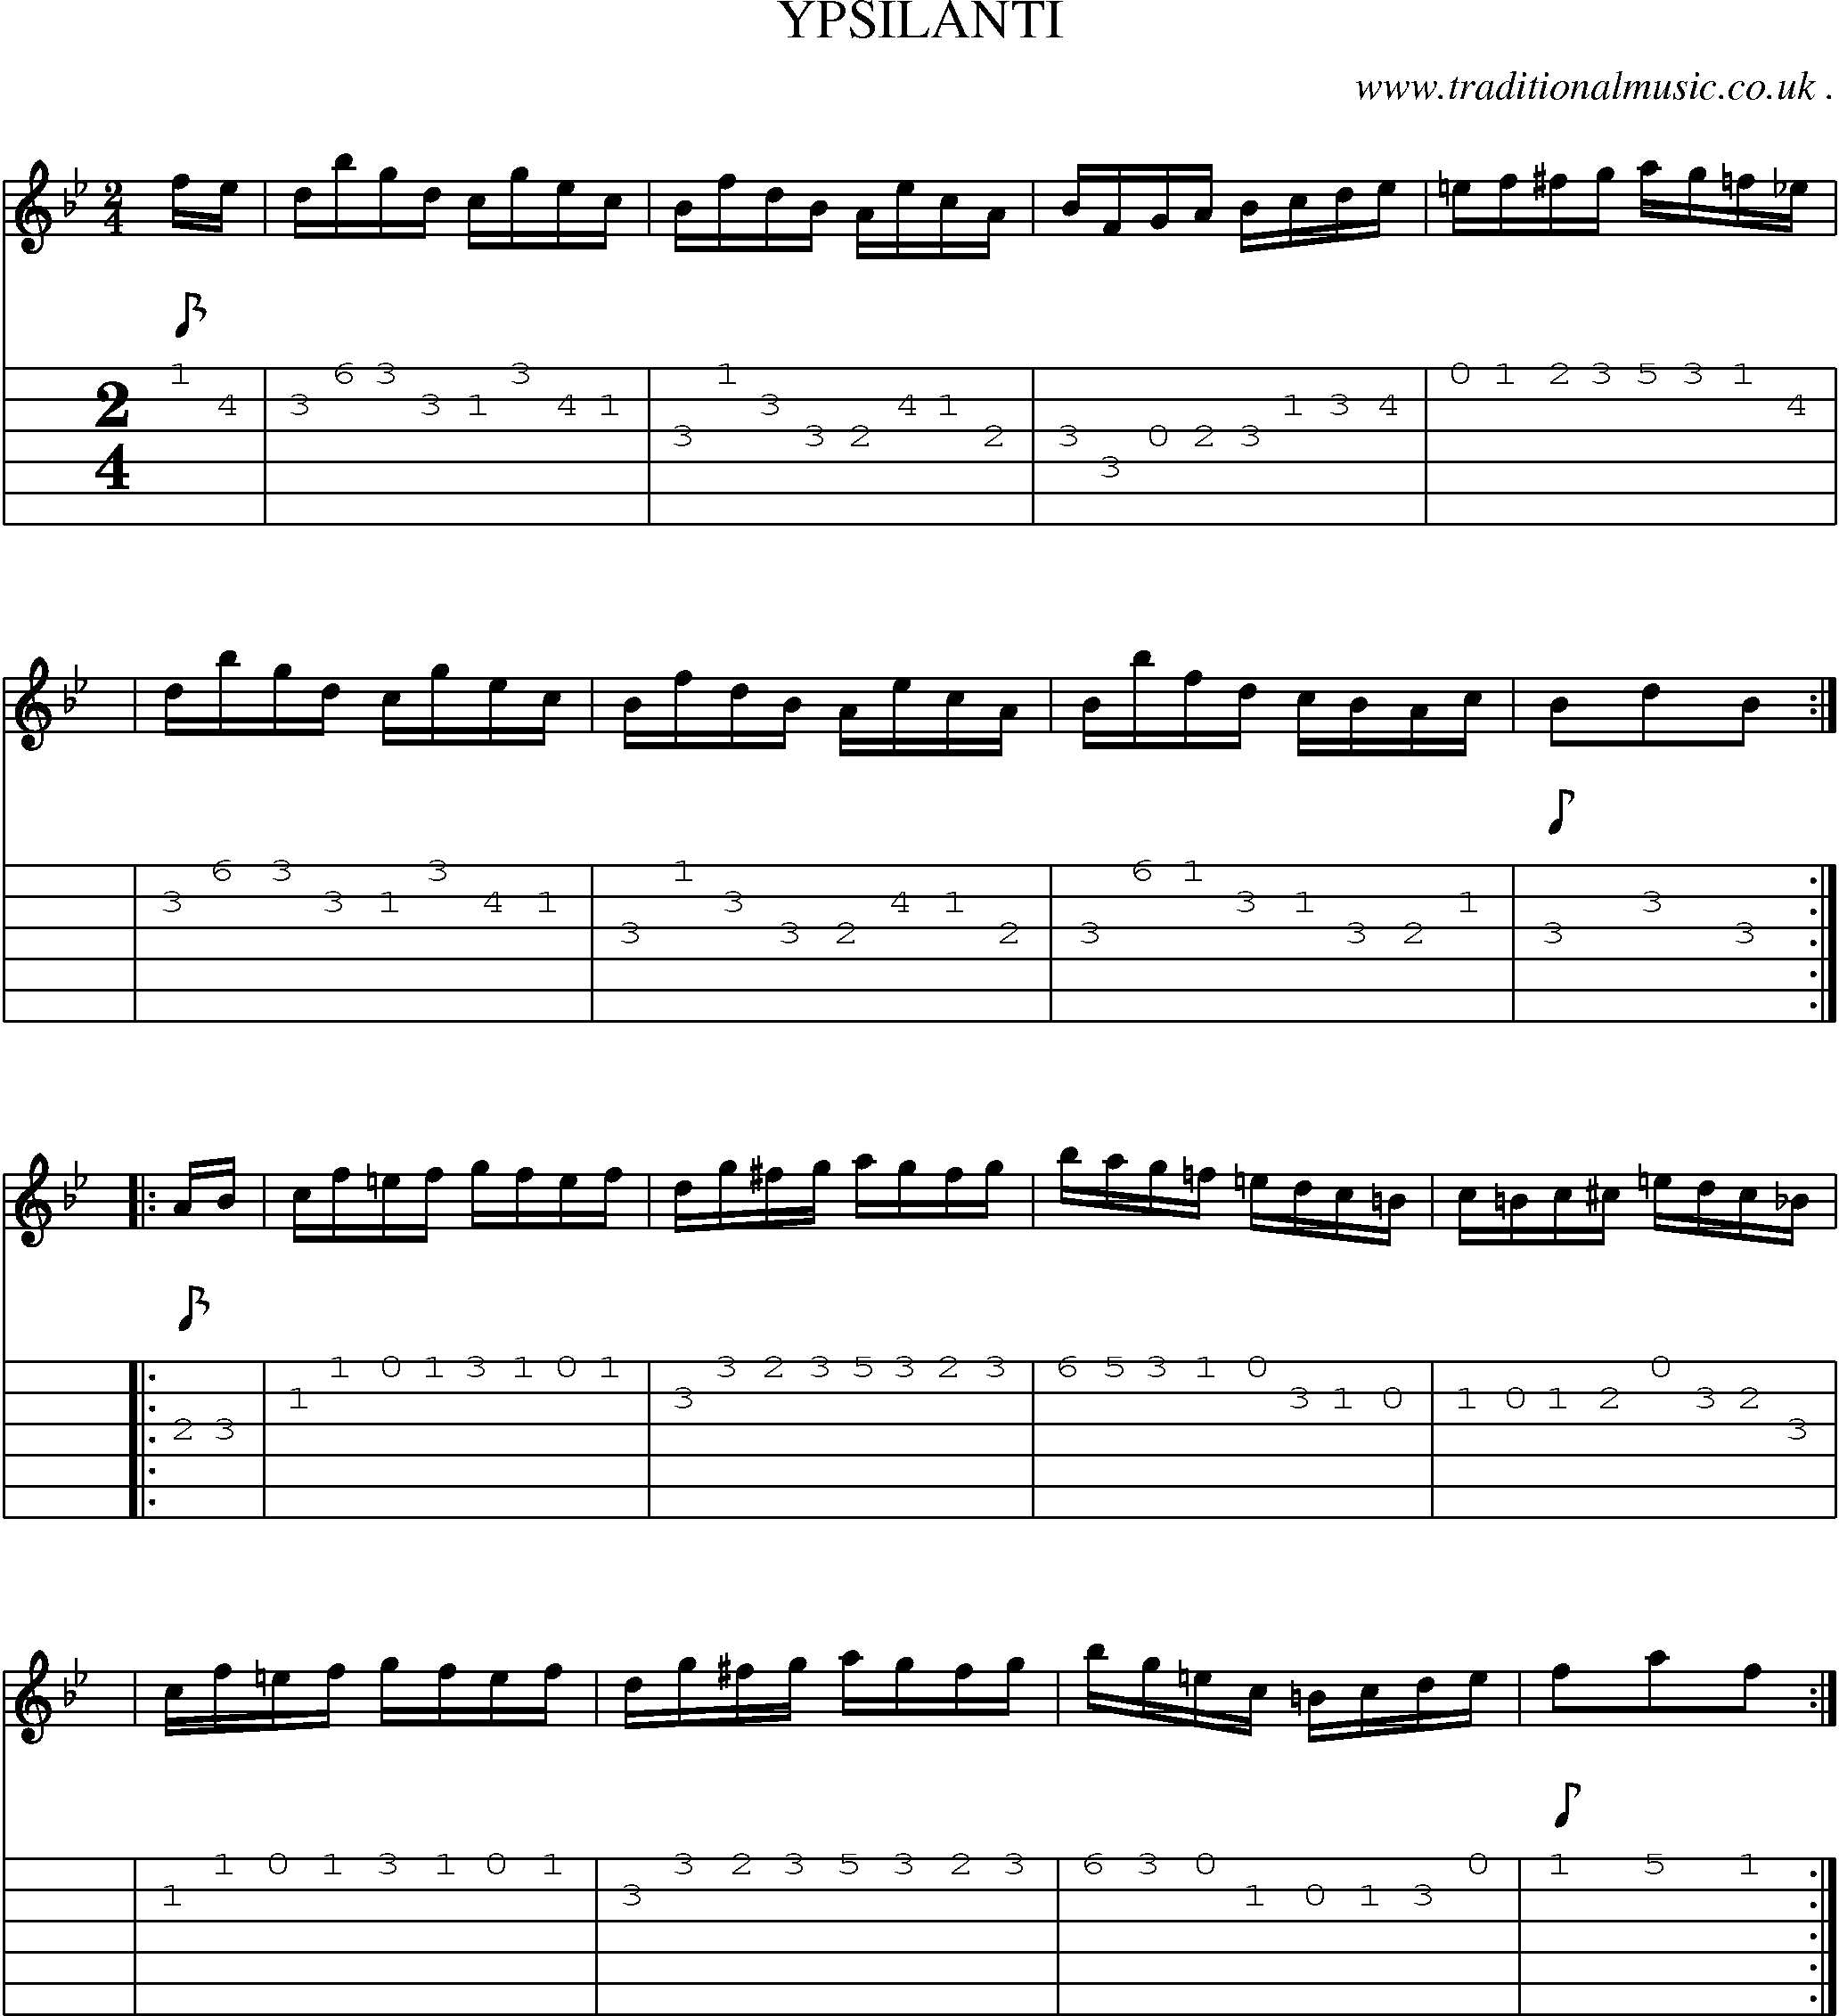 Sheet-Music and Guitar Tabs for Ypsilanti